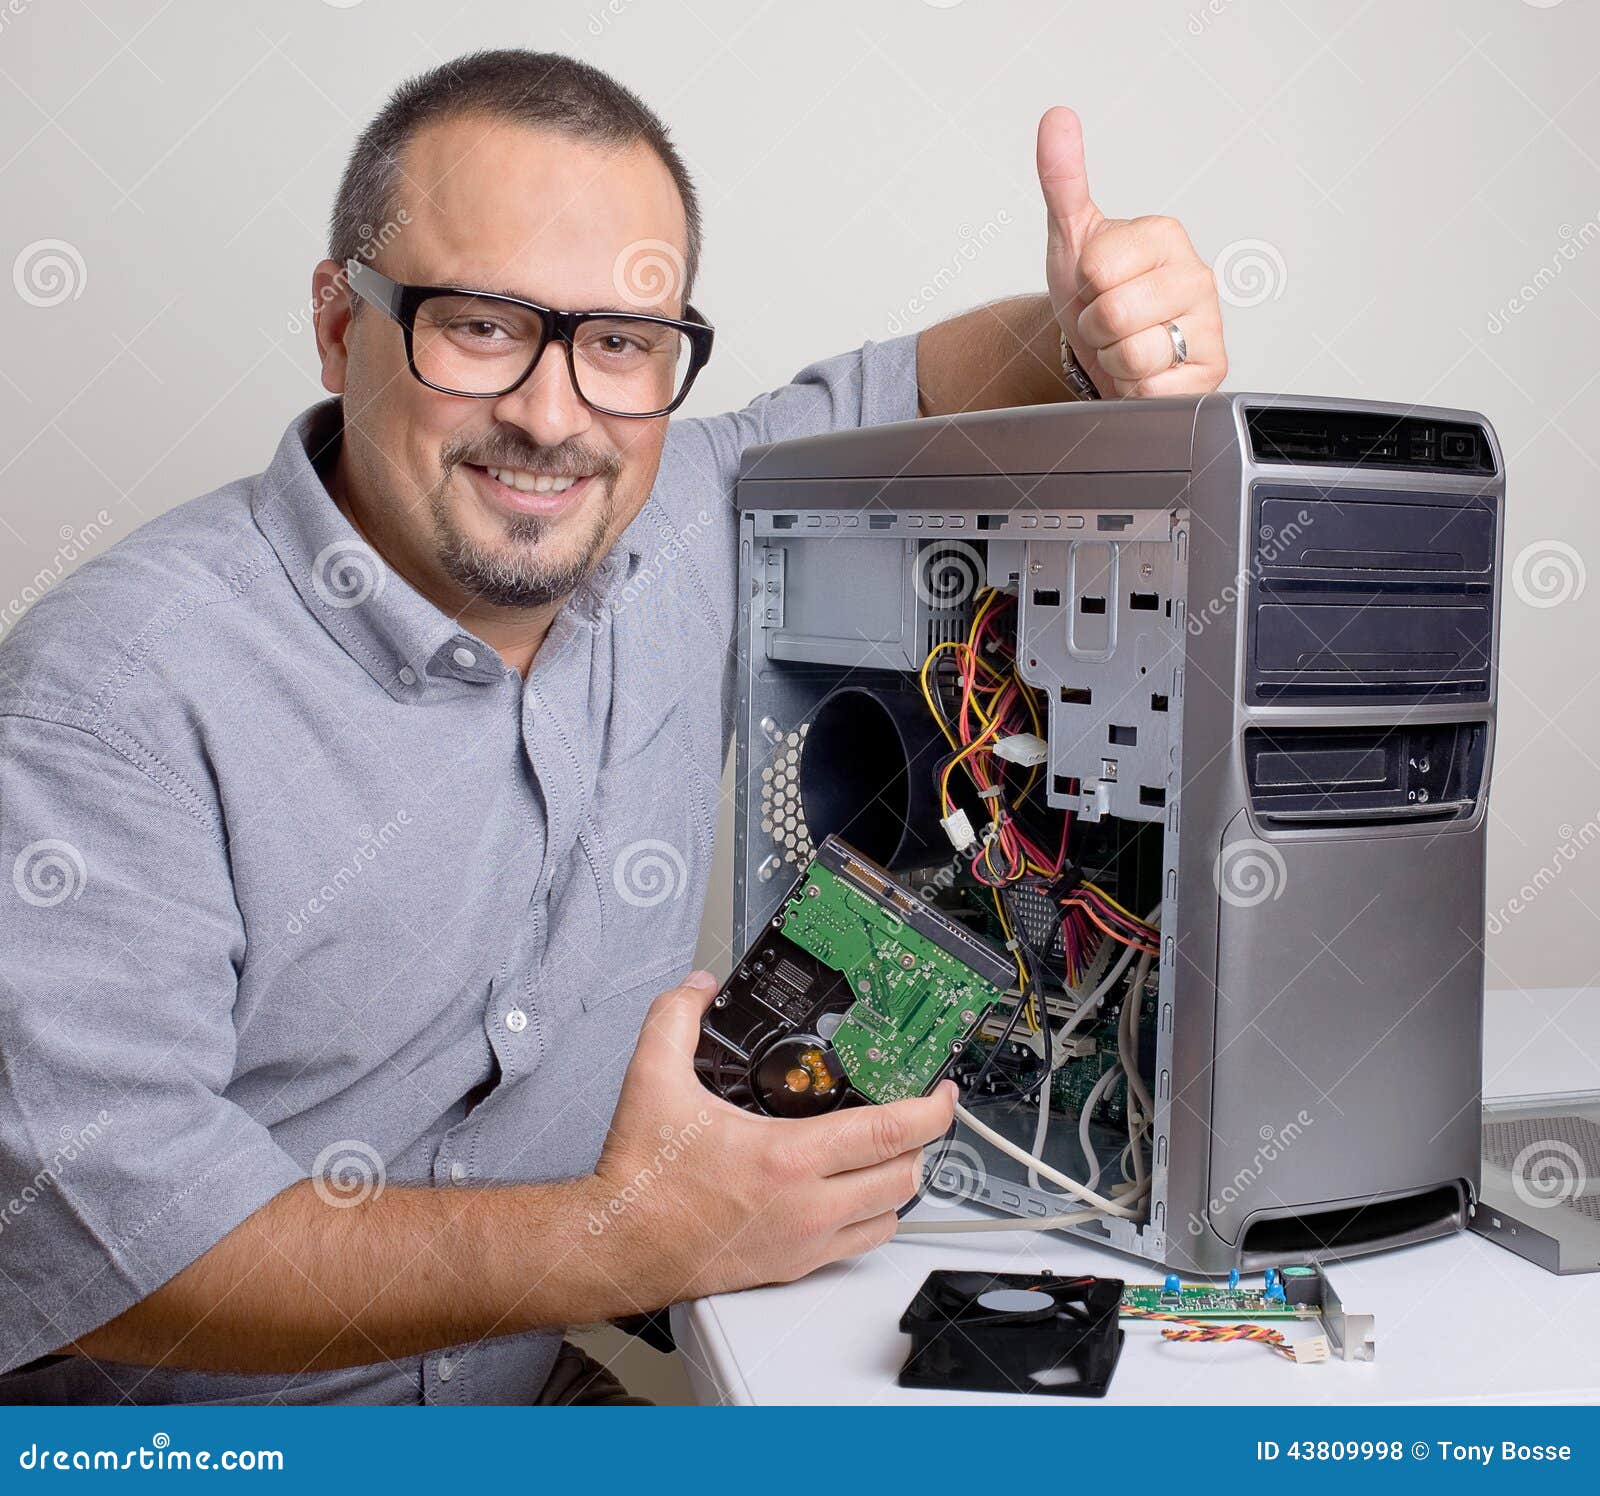 computer-repair-its-taken-care-of-stock-photo-image-43809998